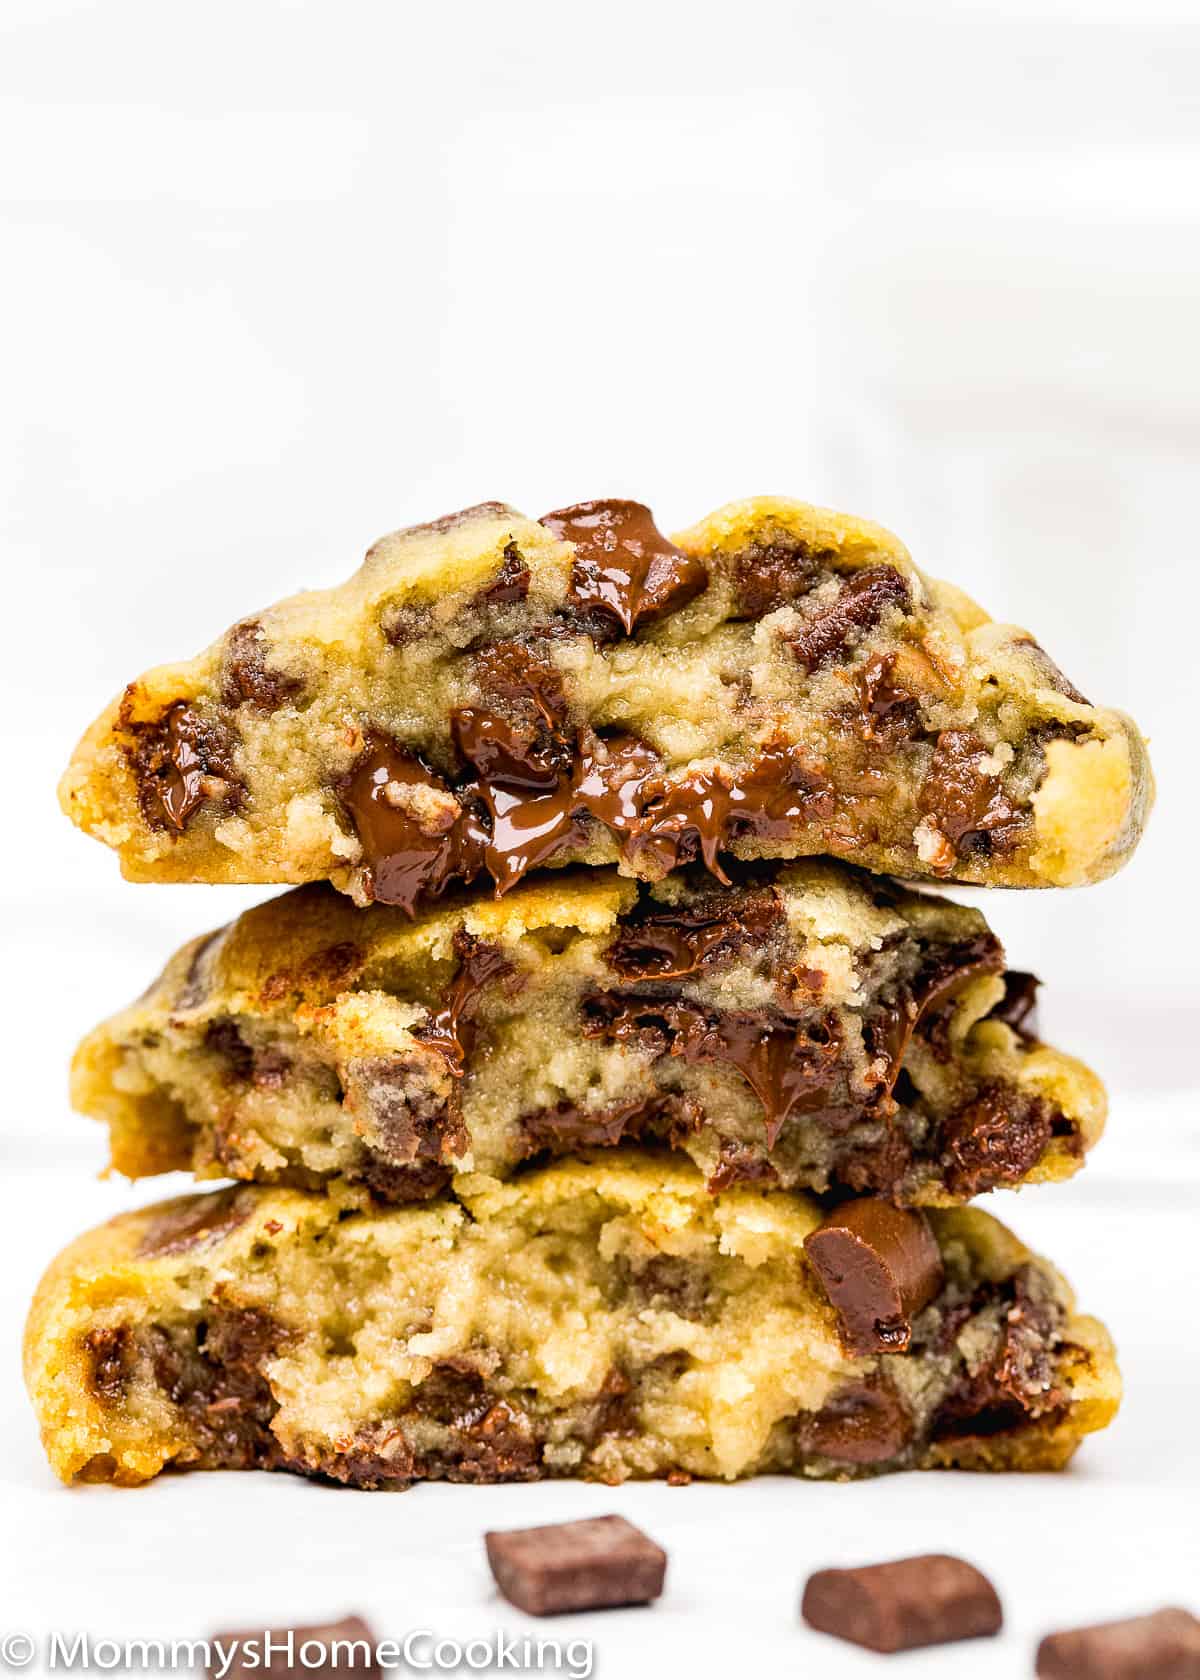 Eggless Chocolate Chip Cookies showing the melted inside texture.